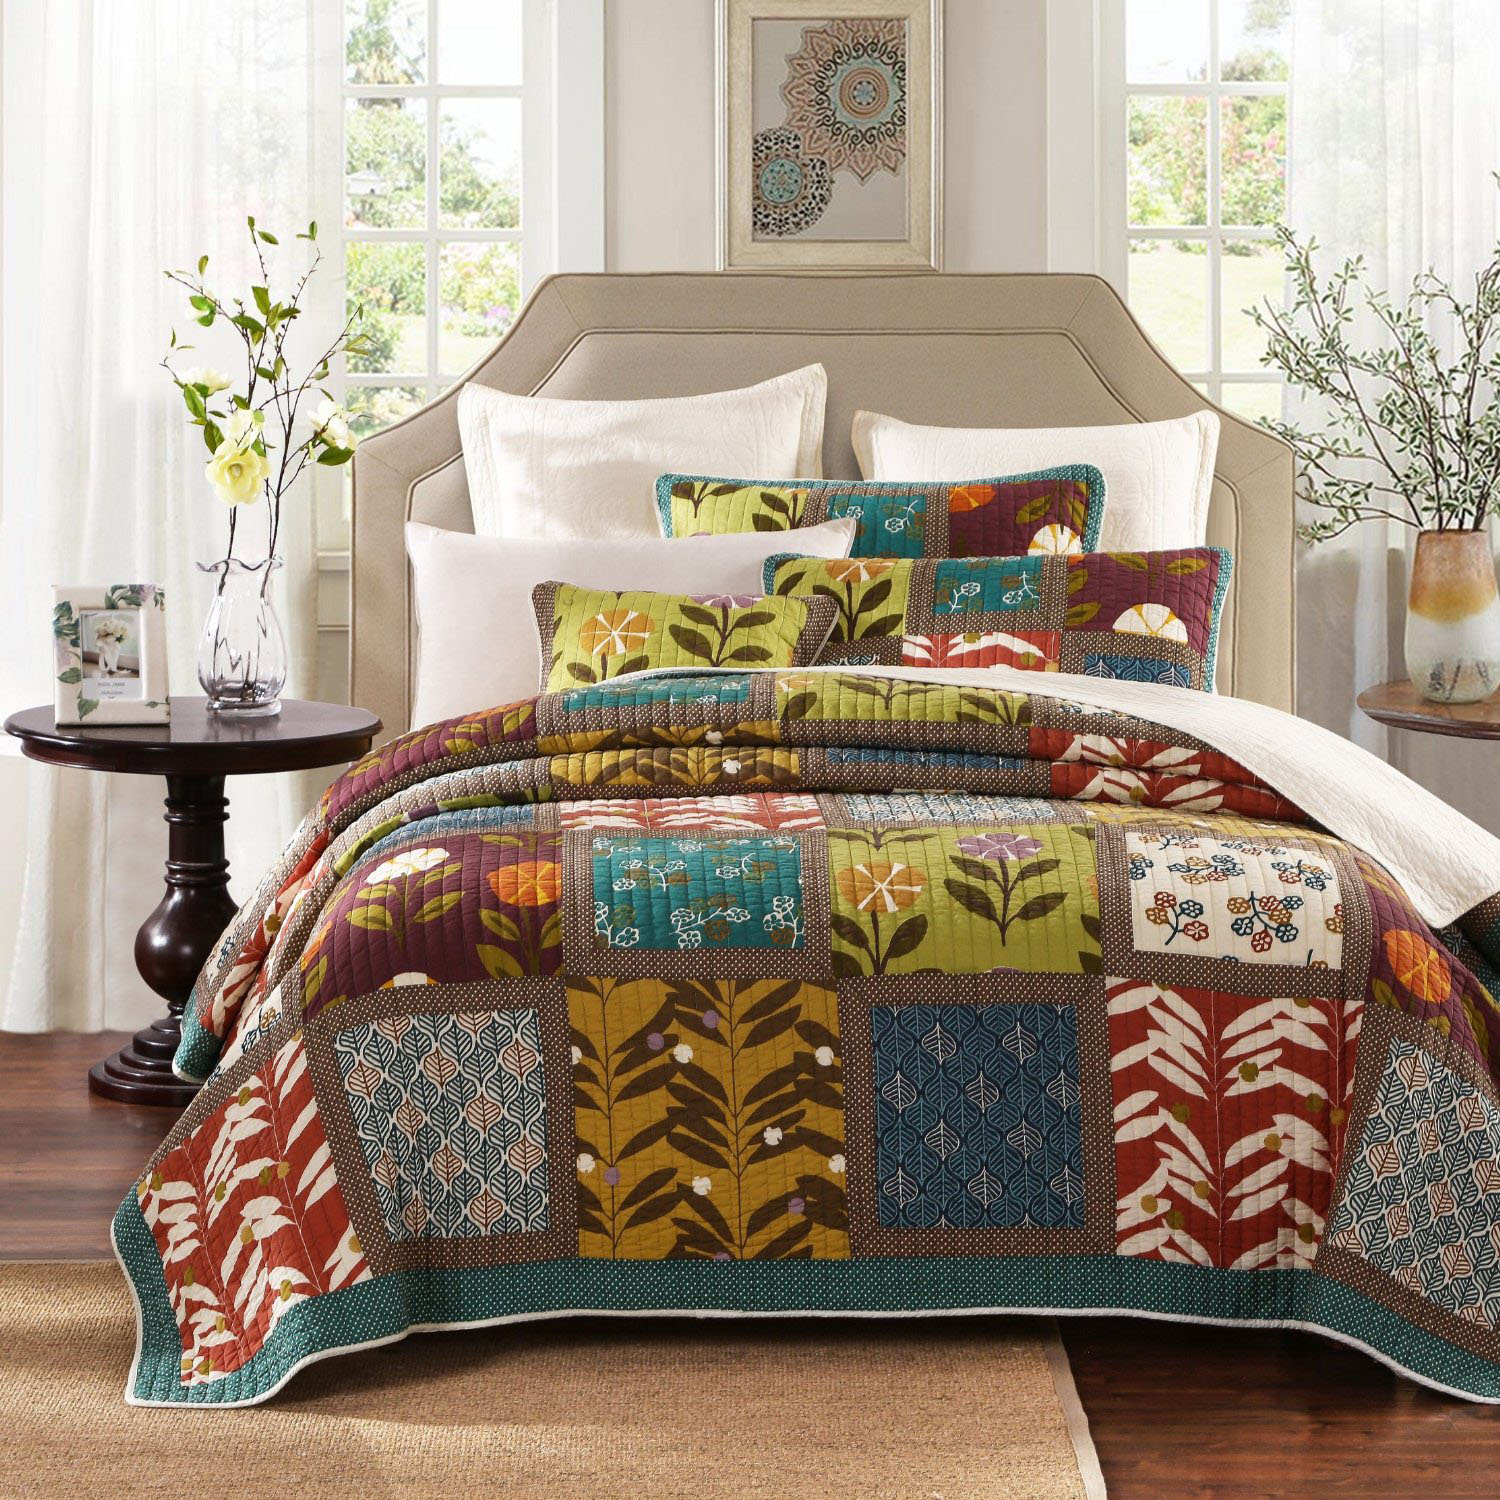 Bedroom Decor With Bohemian Comforters, Colorful King Bedding Sets